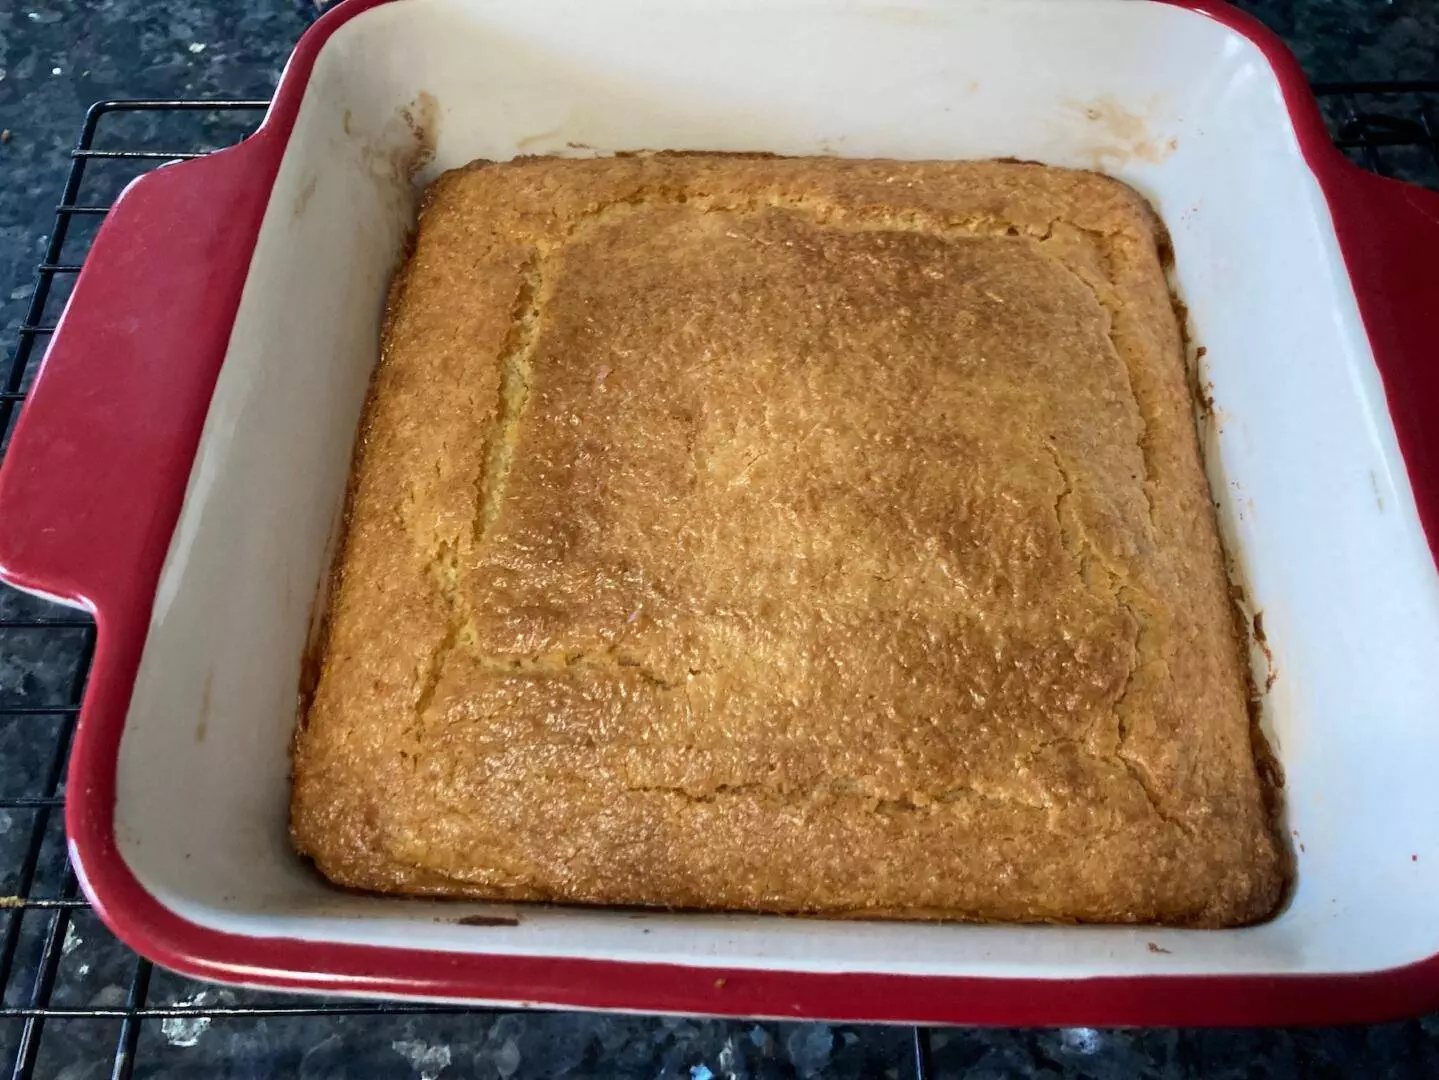 Southern Cornbread with Whipping Cream from Out of the Box Baking.com